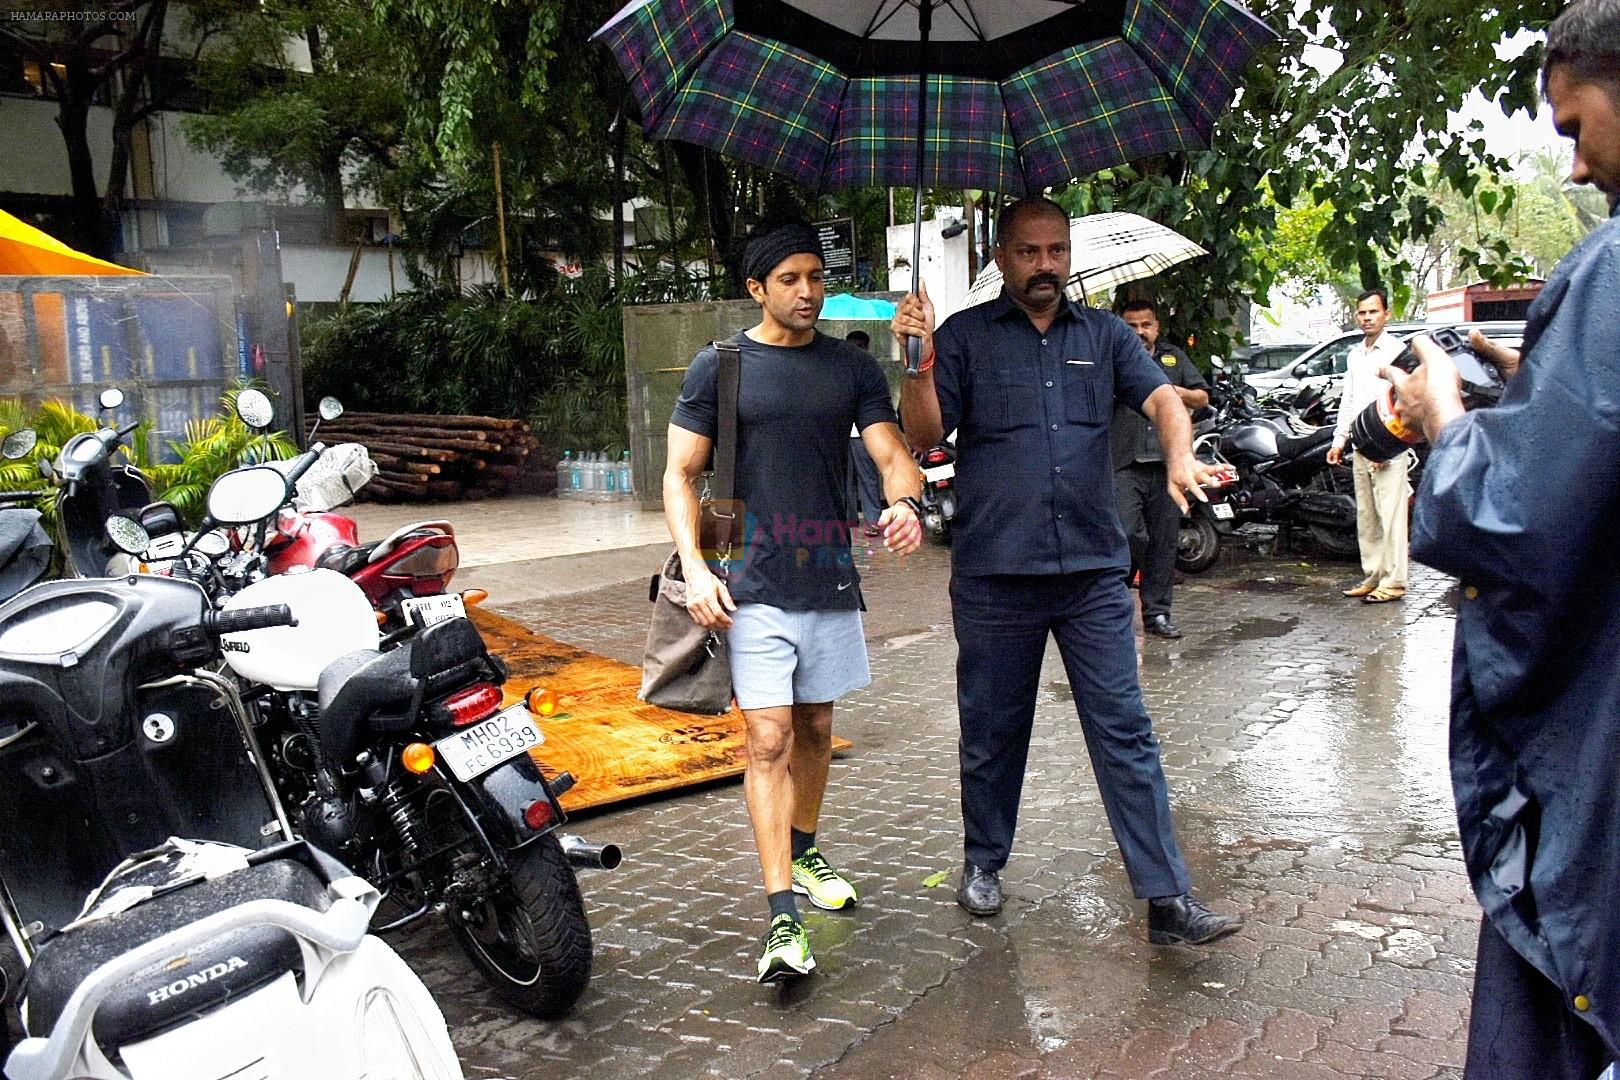 Farhan Akhtar spotted at Otters club in bandra on 15th June 2019